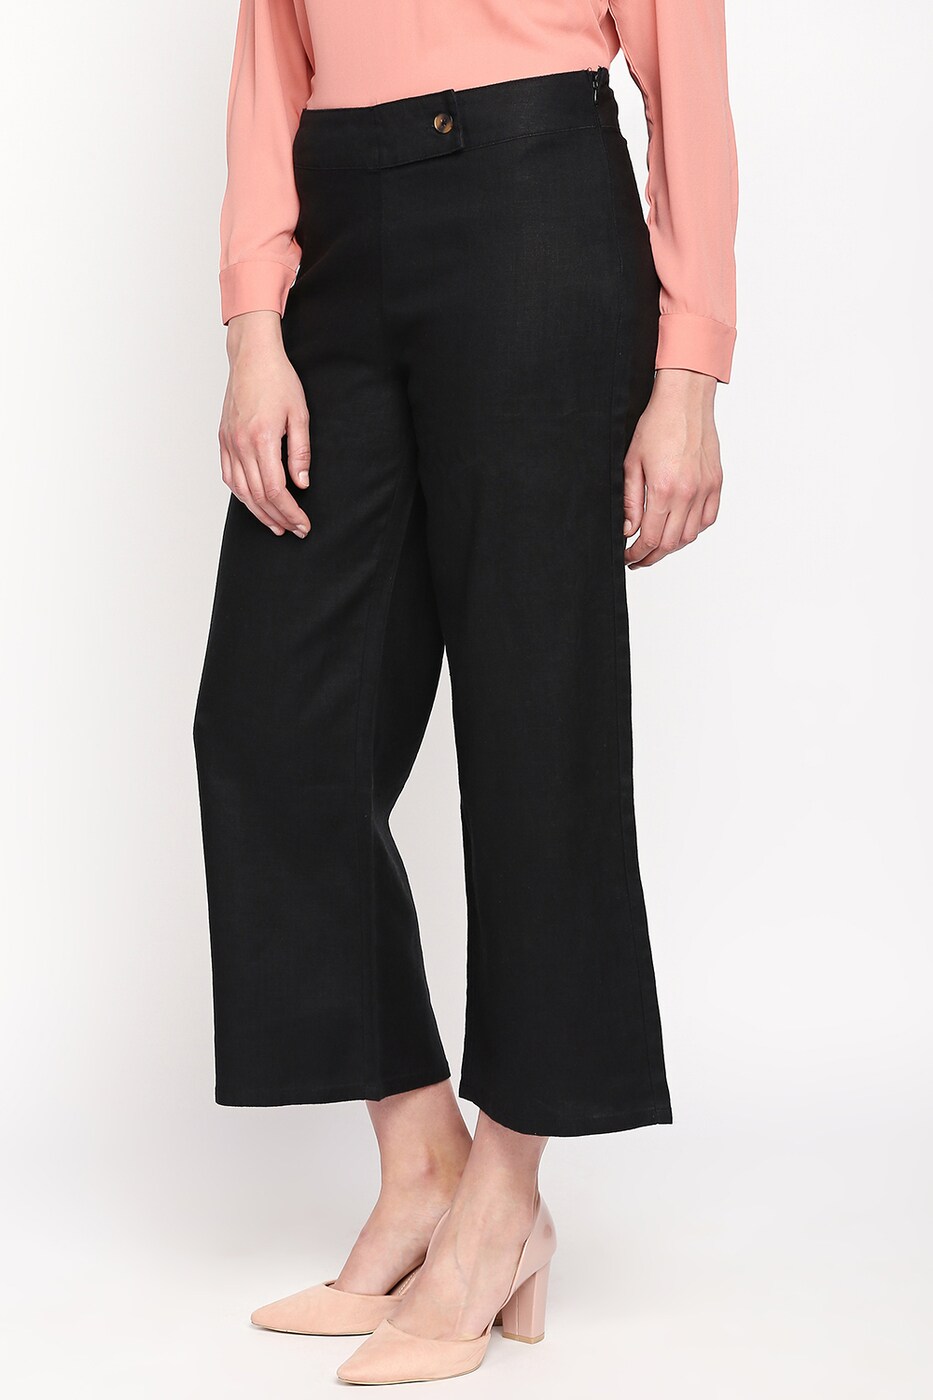 Buy Black Trousers  Pants for Women by Annabelle by Pantaloons Online   Ajiocom